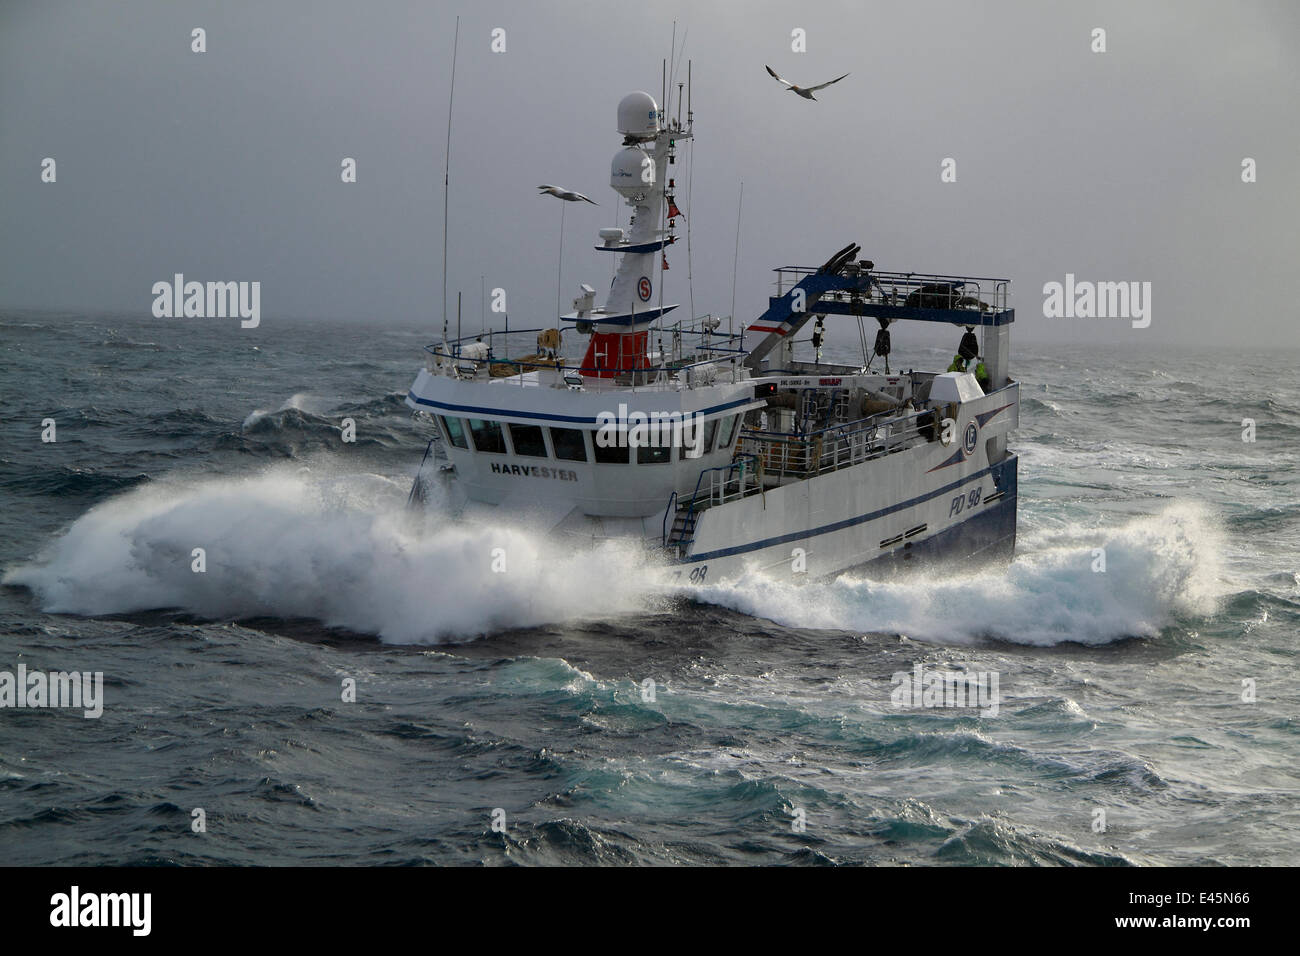 Gull flying over fishing vessel Harveste' in heavy seas, North Sea.  February 2010. Property released. Stock Photo